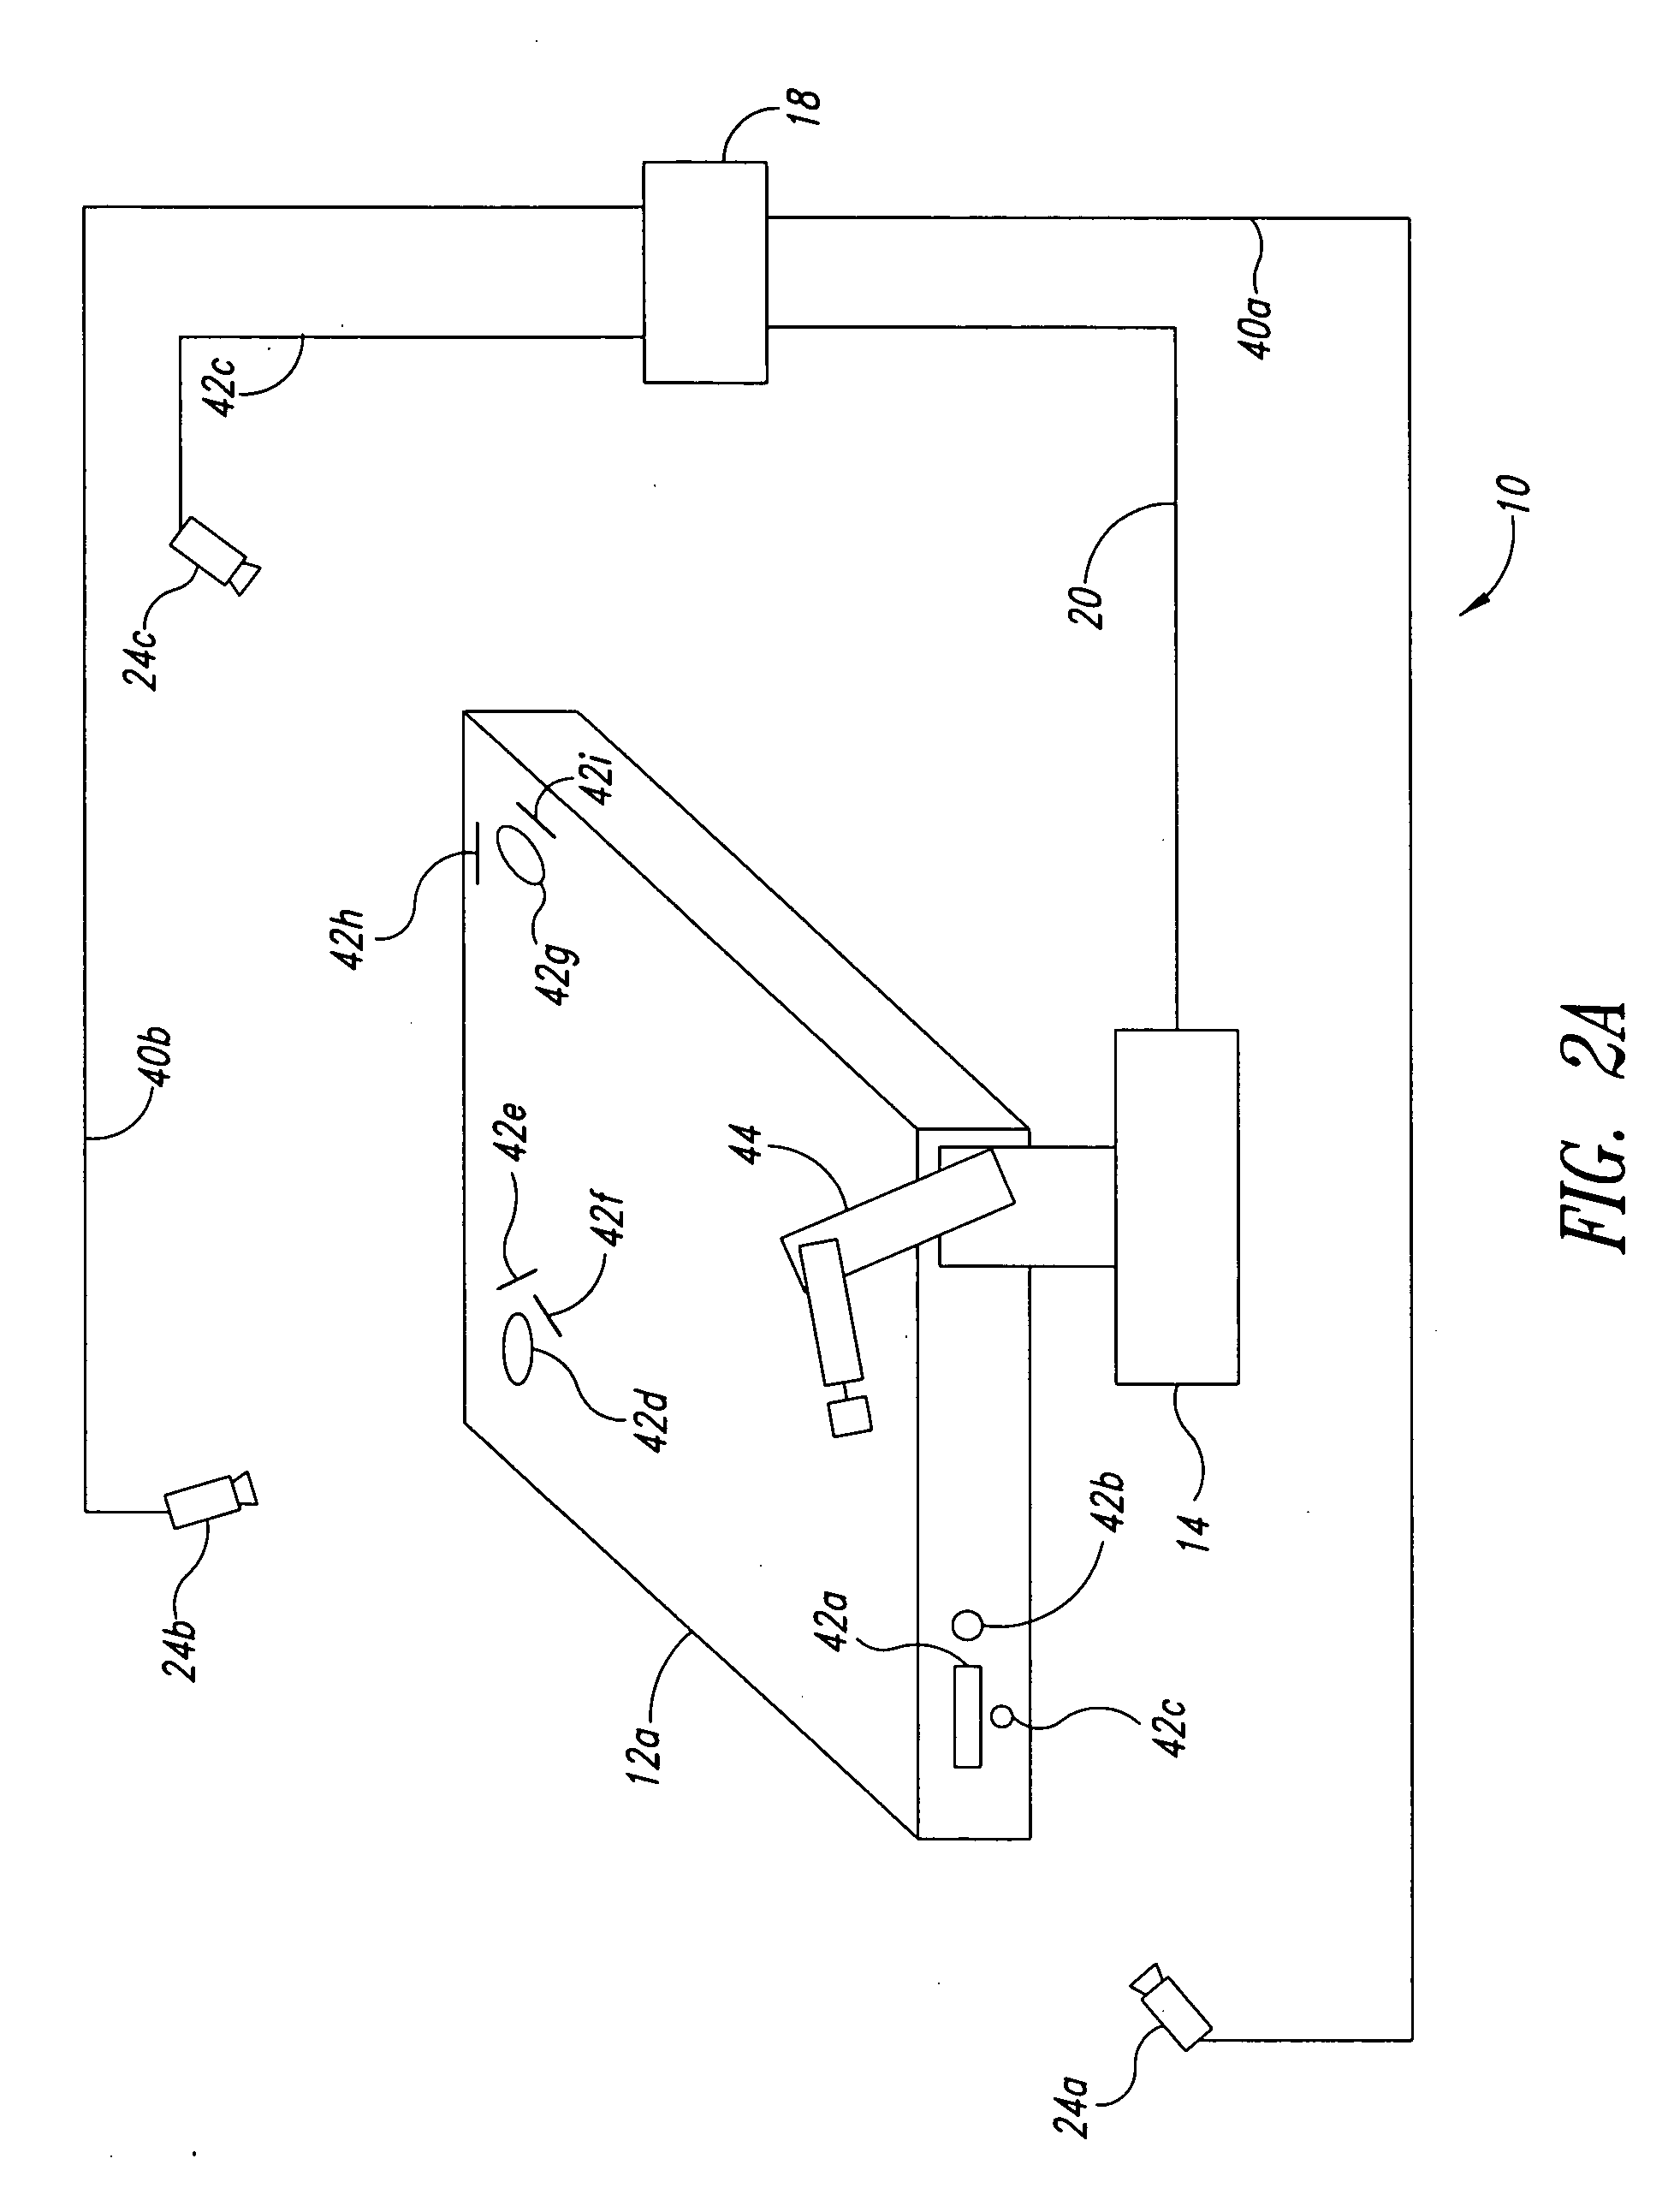 Method and apparatus for machine-vision